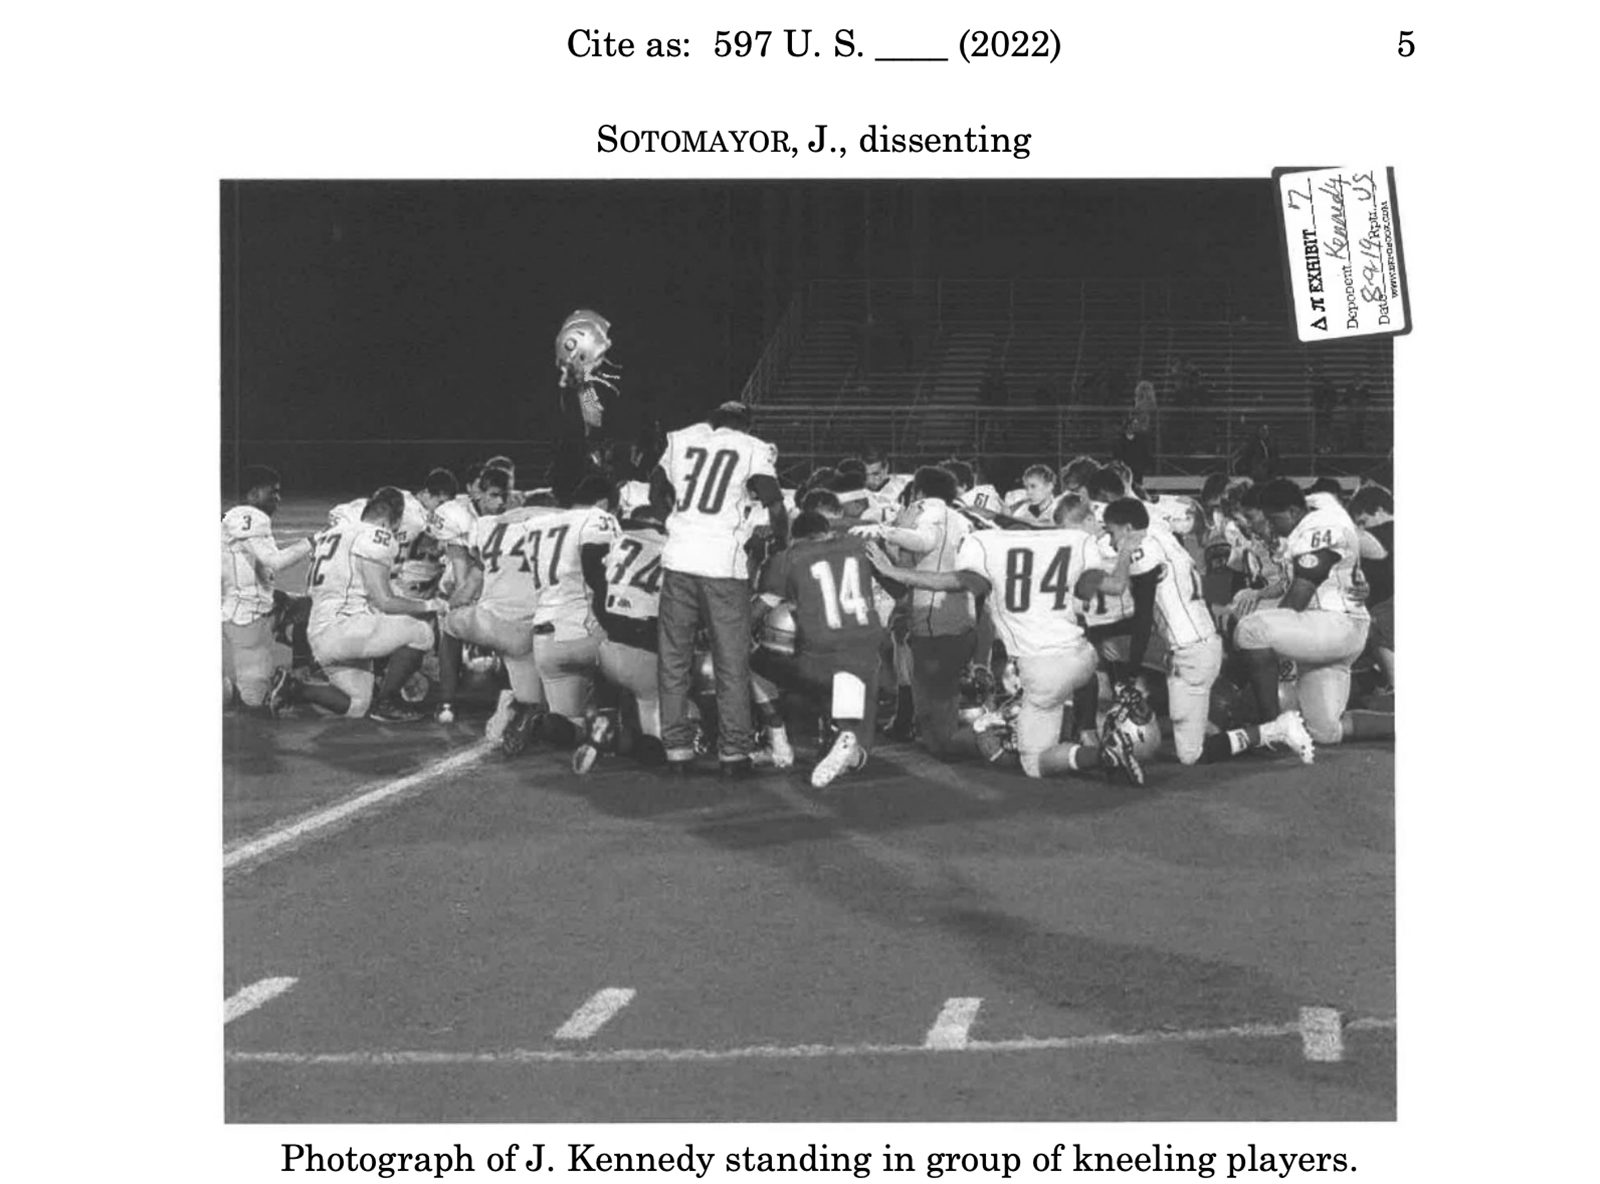 A photo of Joe Kennedy standing in a group of praying players was used as an exhibit in Supreme Court Justice Sonia Sotamayor's dissenting opinion. Screen grab